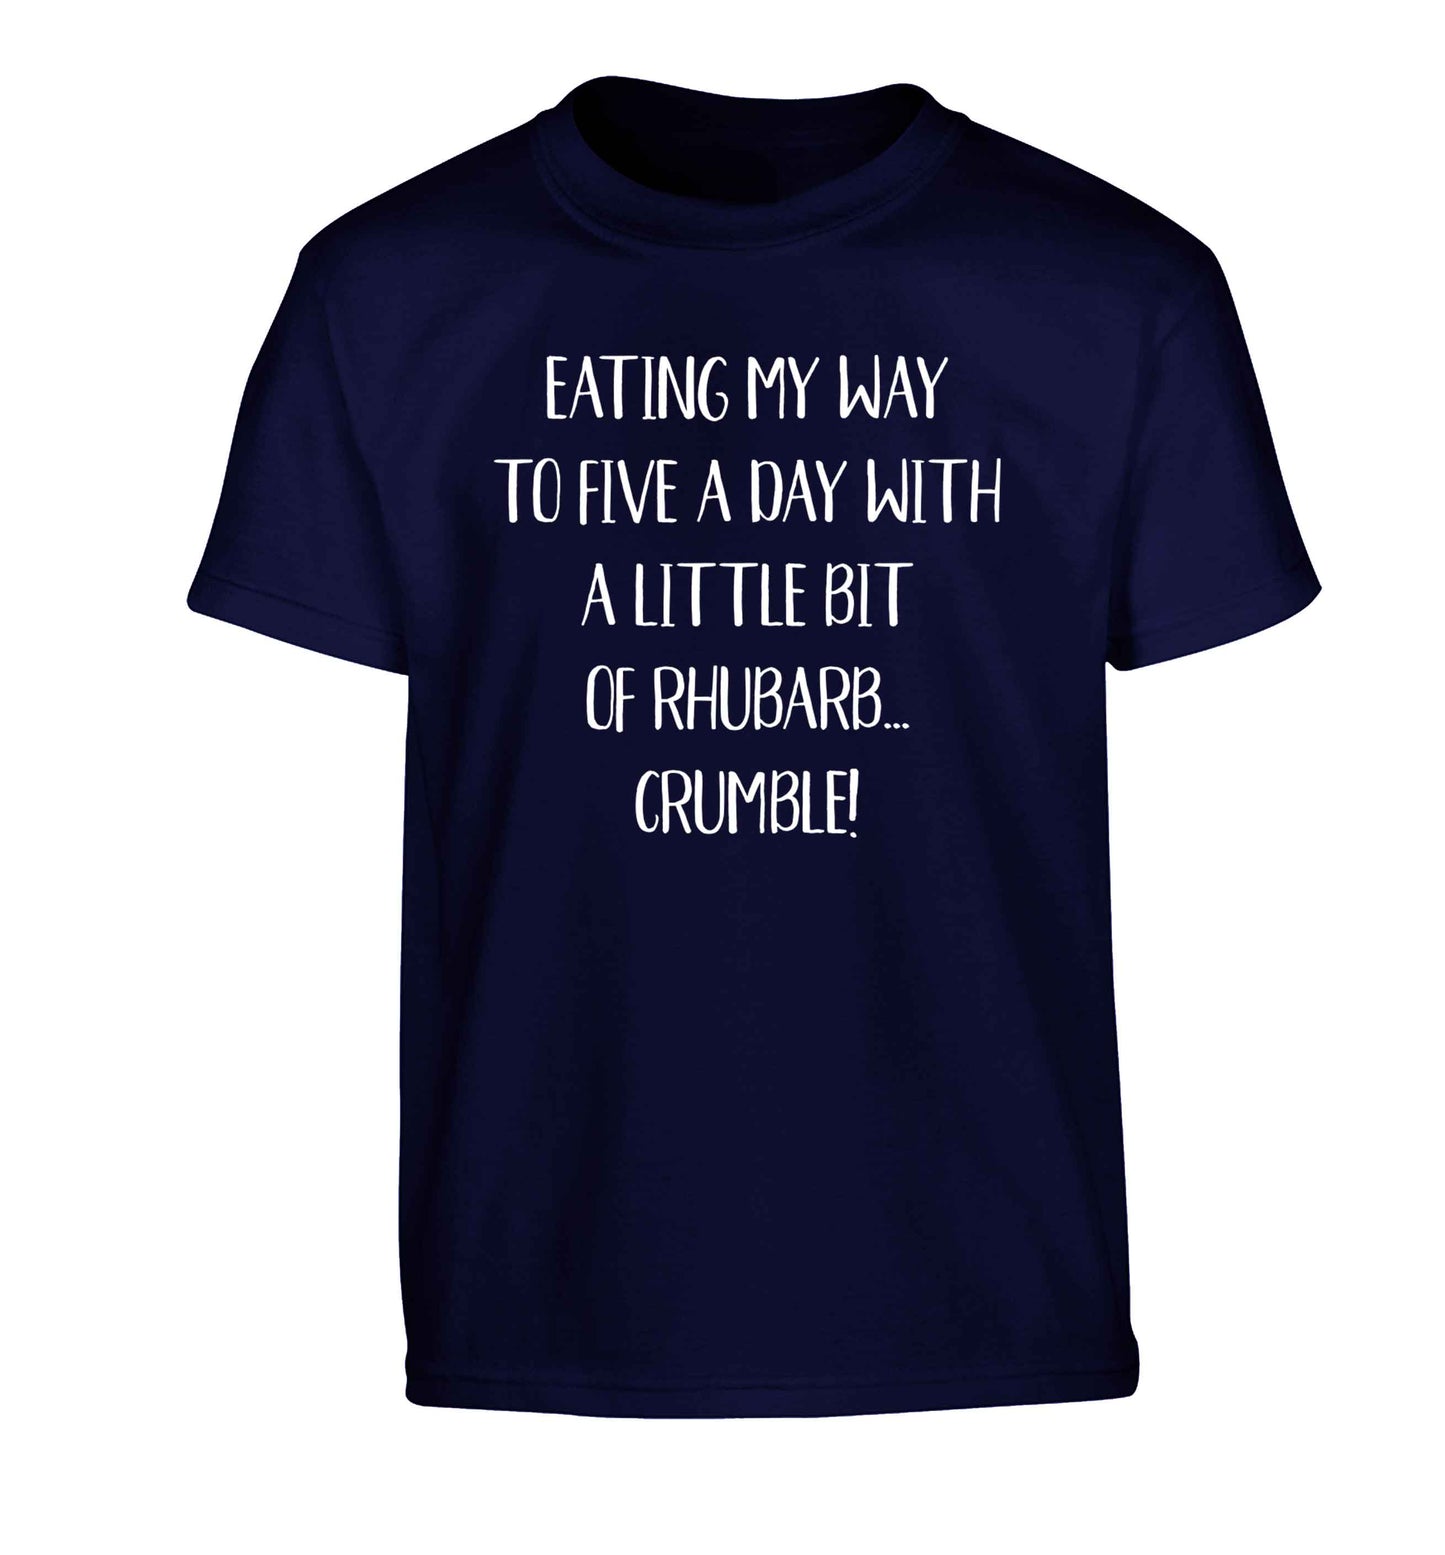 Eating my way to five a day with a little bit of rhubarb crumble Children's navy Tshirt 12-13 Years